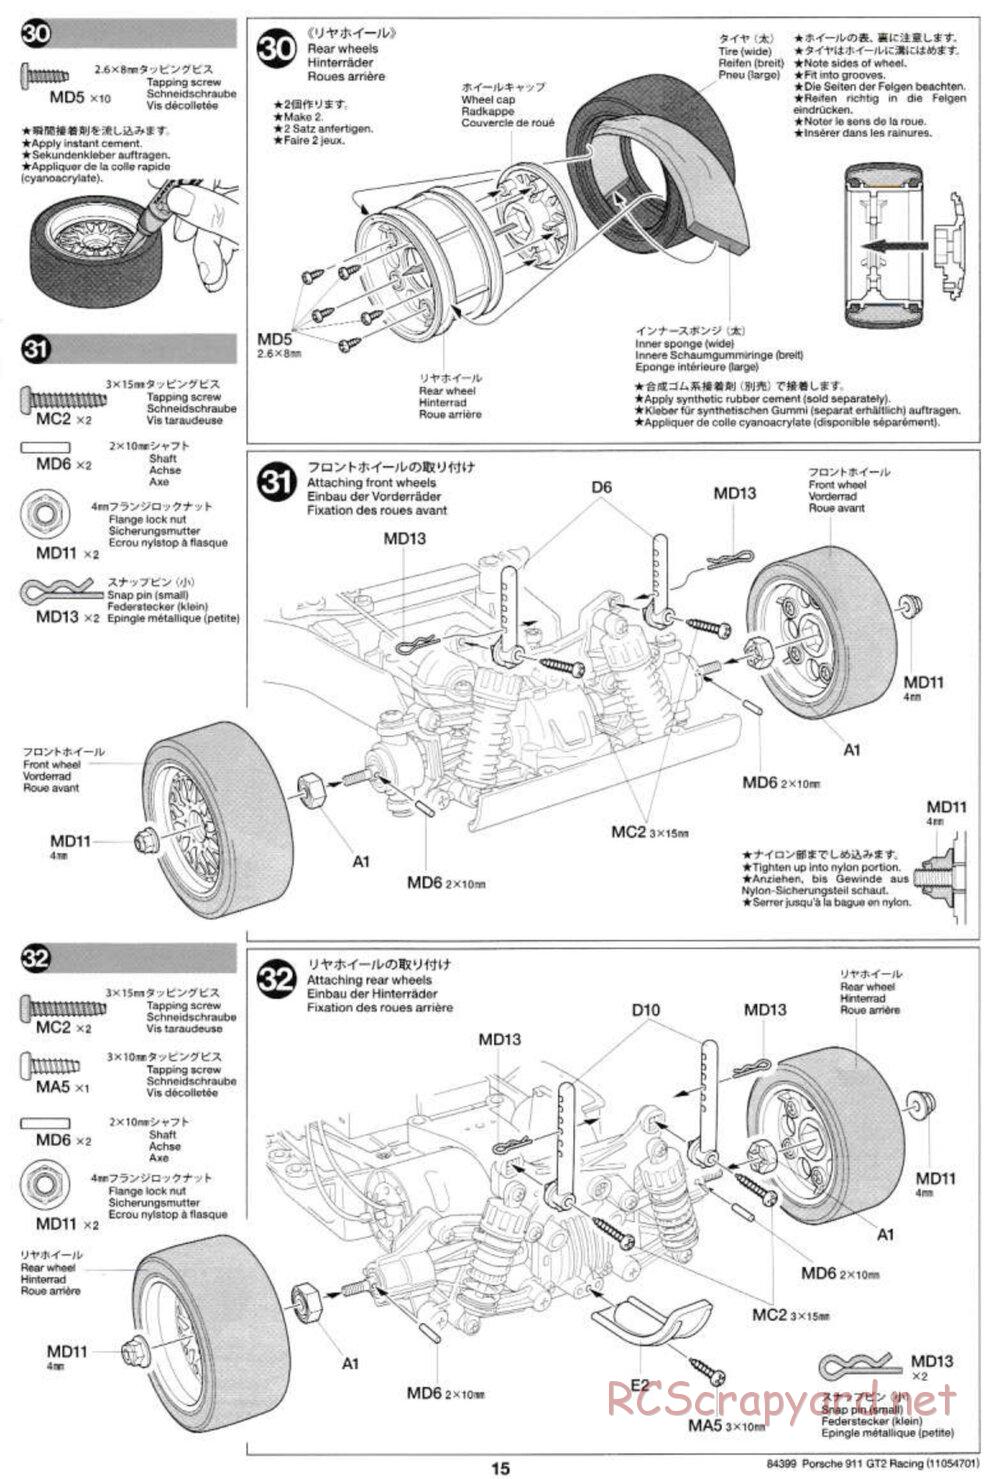 Tamiya - Porsche 911 GT2 Racing - TA-02SW Chassis - Manual - Page 15